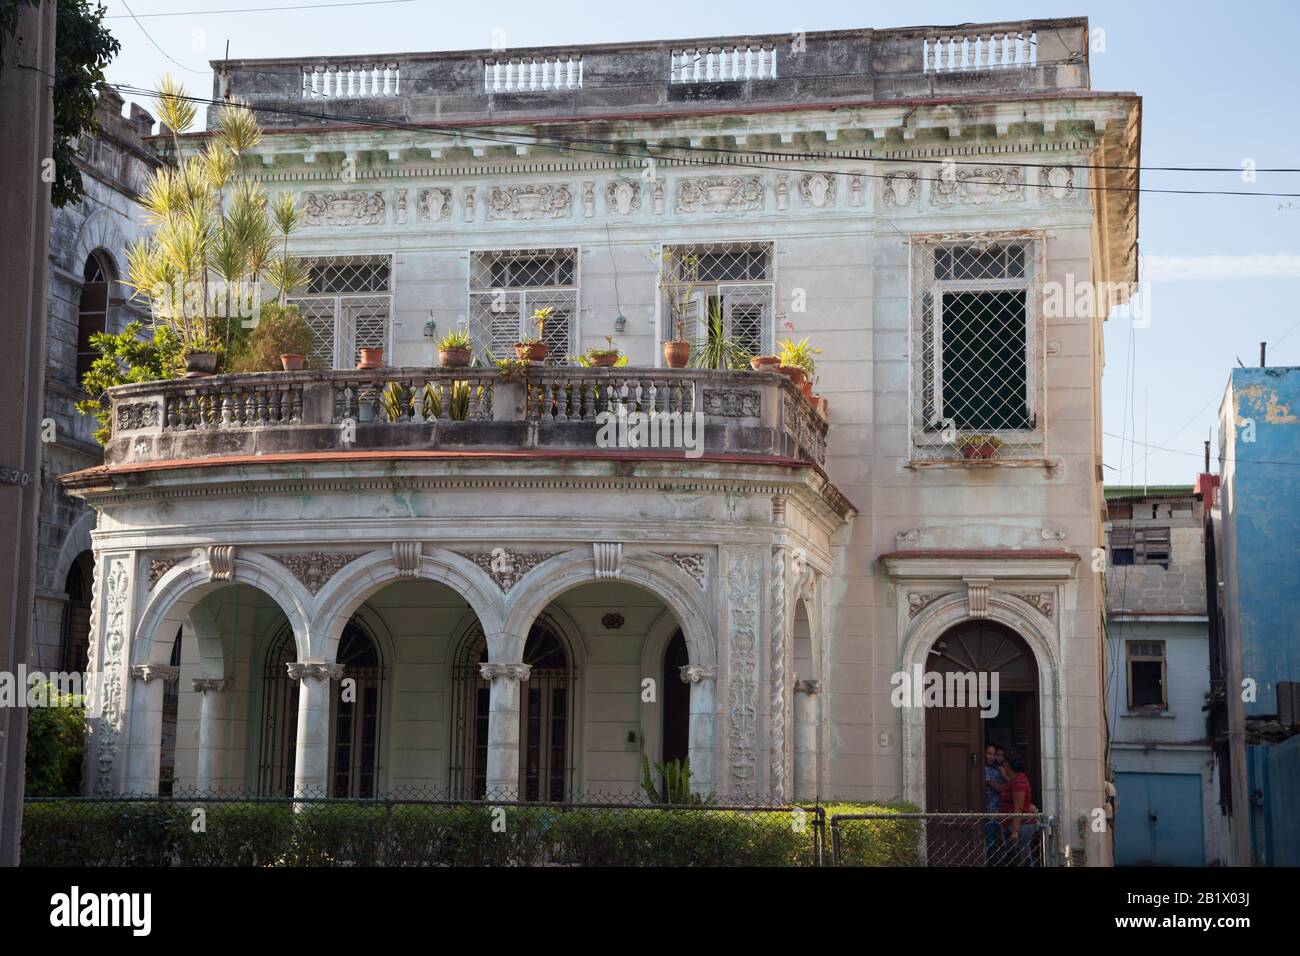 A beautiful historic home in Havana, Cuba with arches, a deck, and exterior landscaping Stock Photo